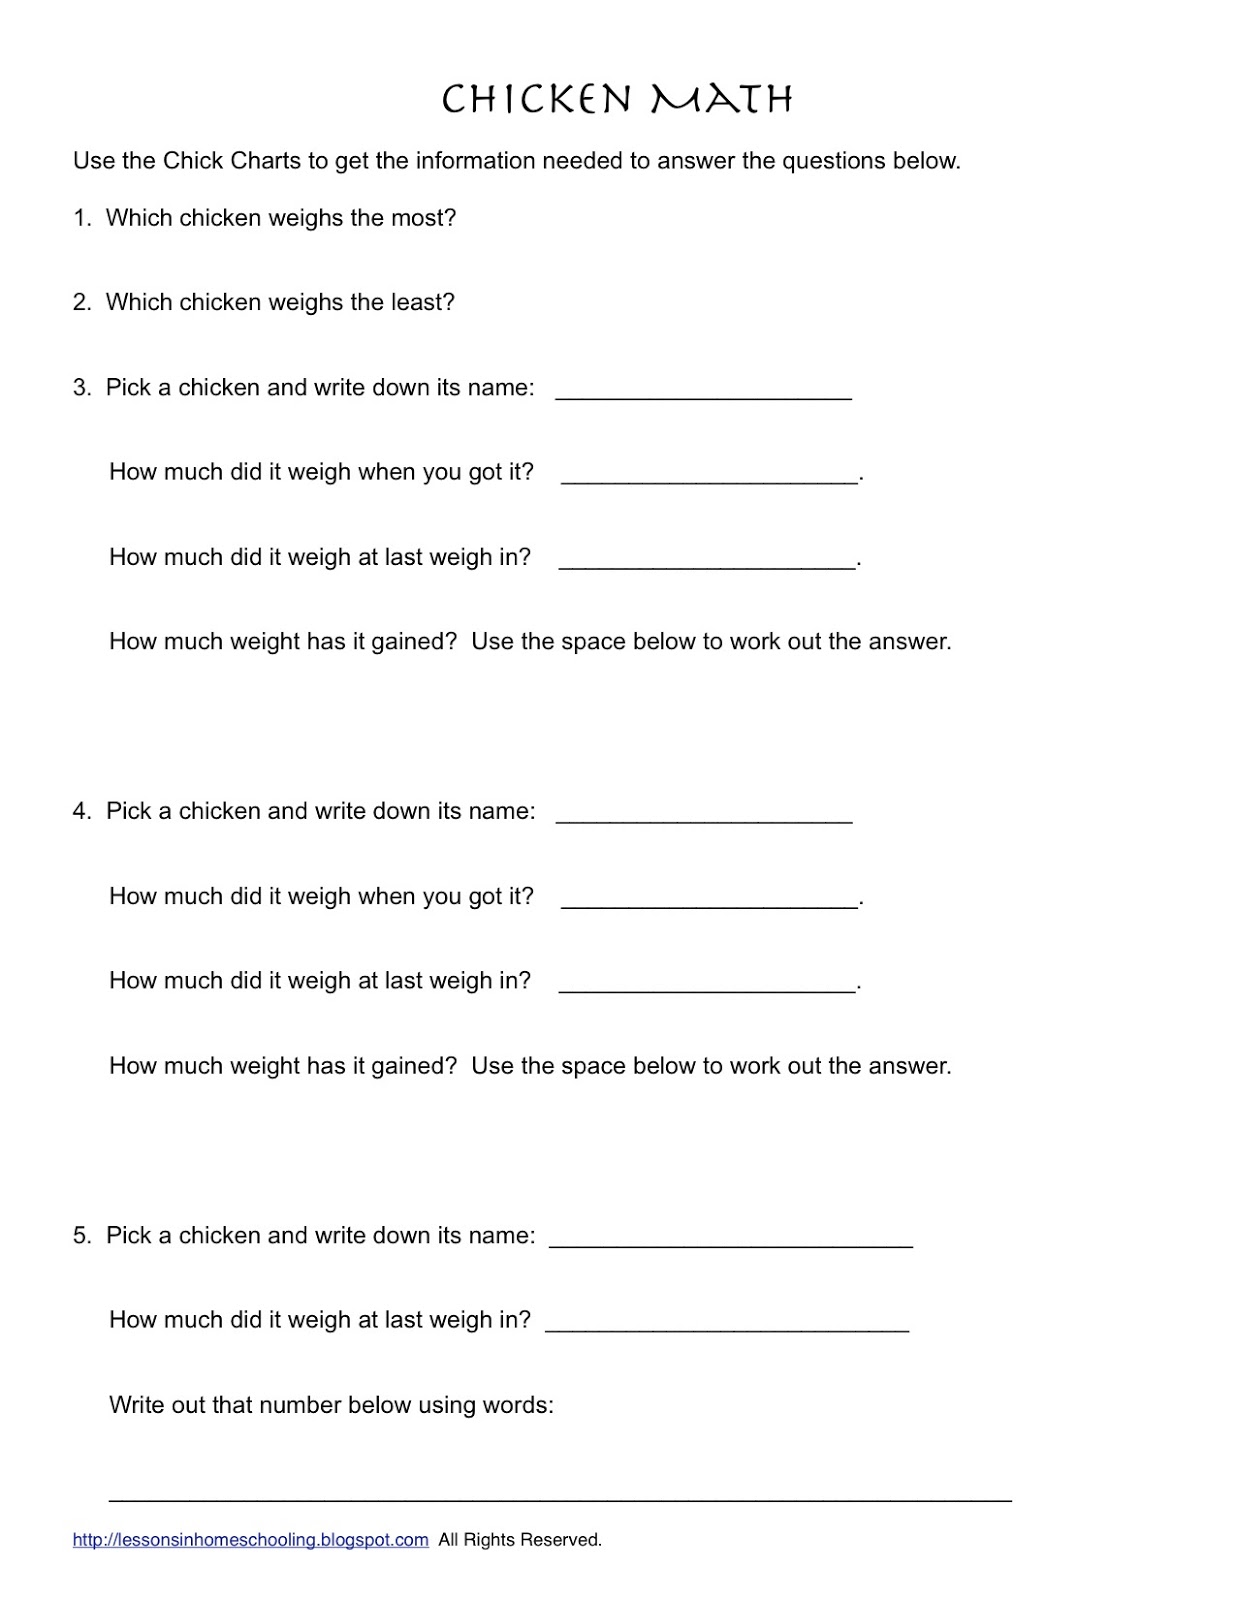 15 Best Images Of Basic Cooking Skills Worksheets Basic Knife Cuts Kitchen Knife Types And